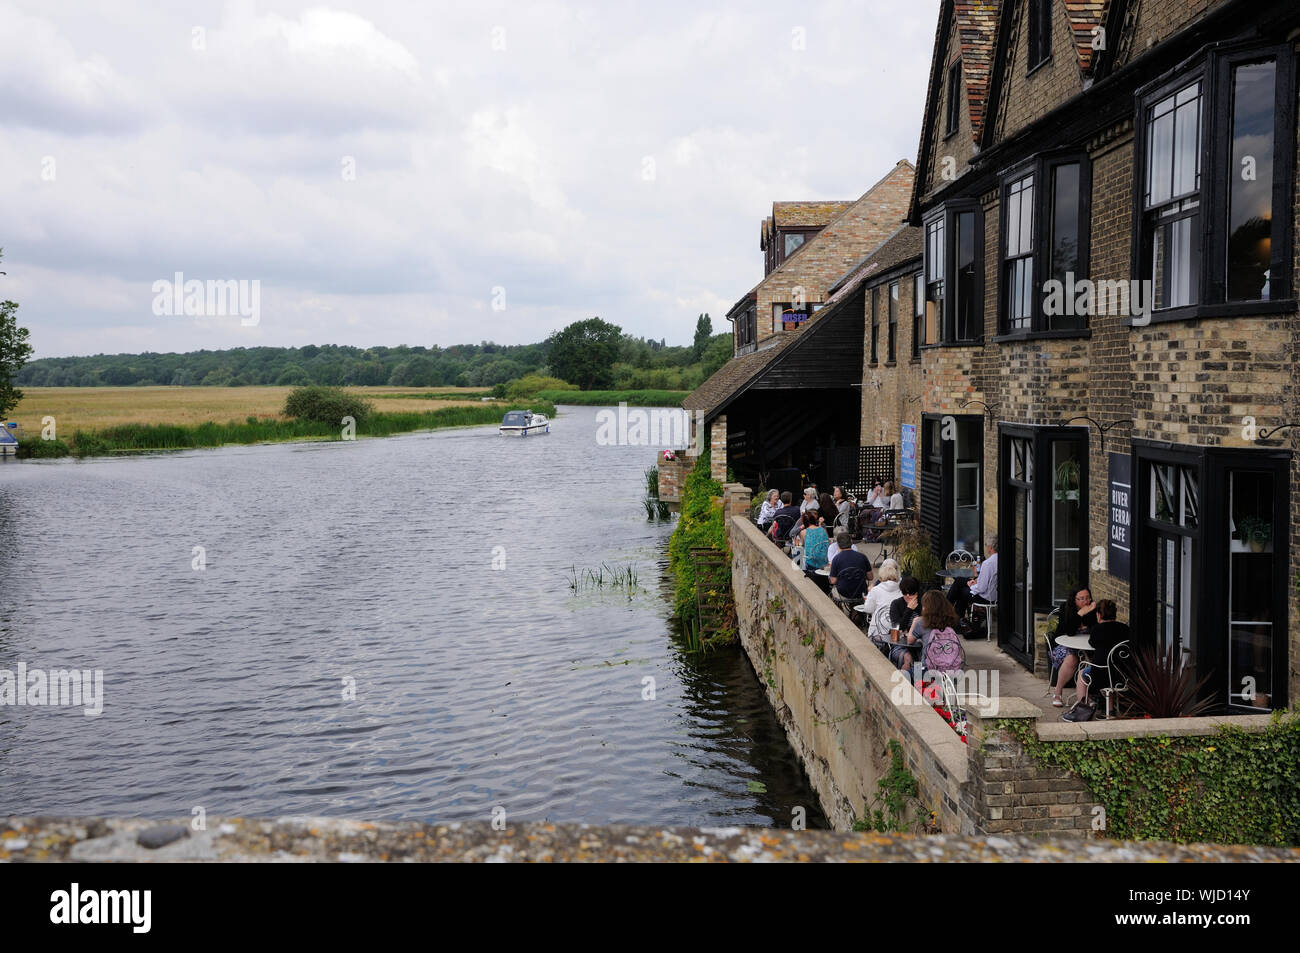 View across The Great Ouse River from The Bridge, St Ives, Cambridgeshire Stock Photo